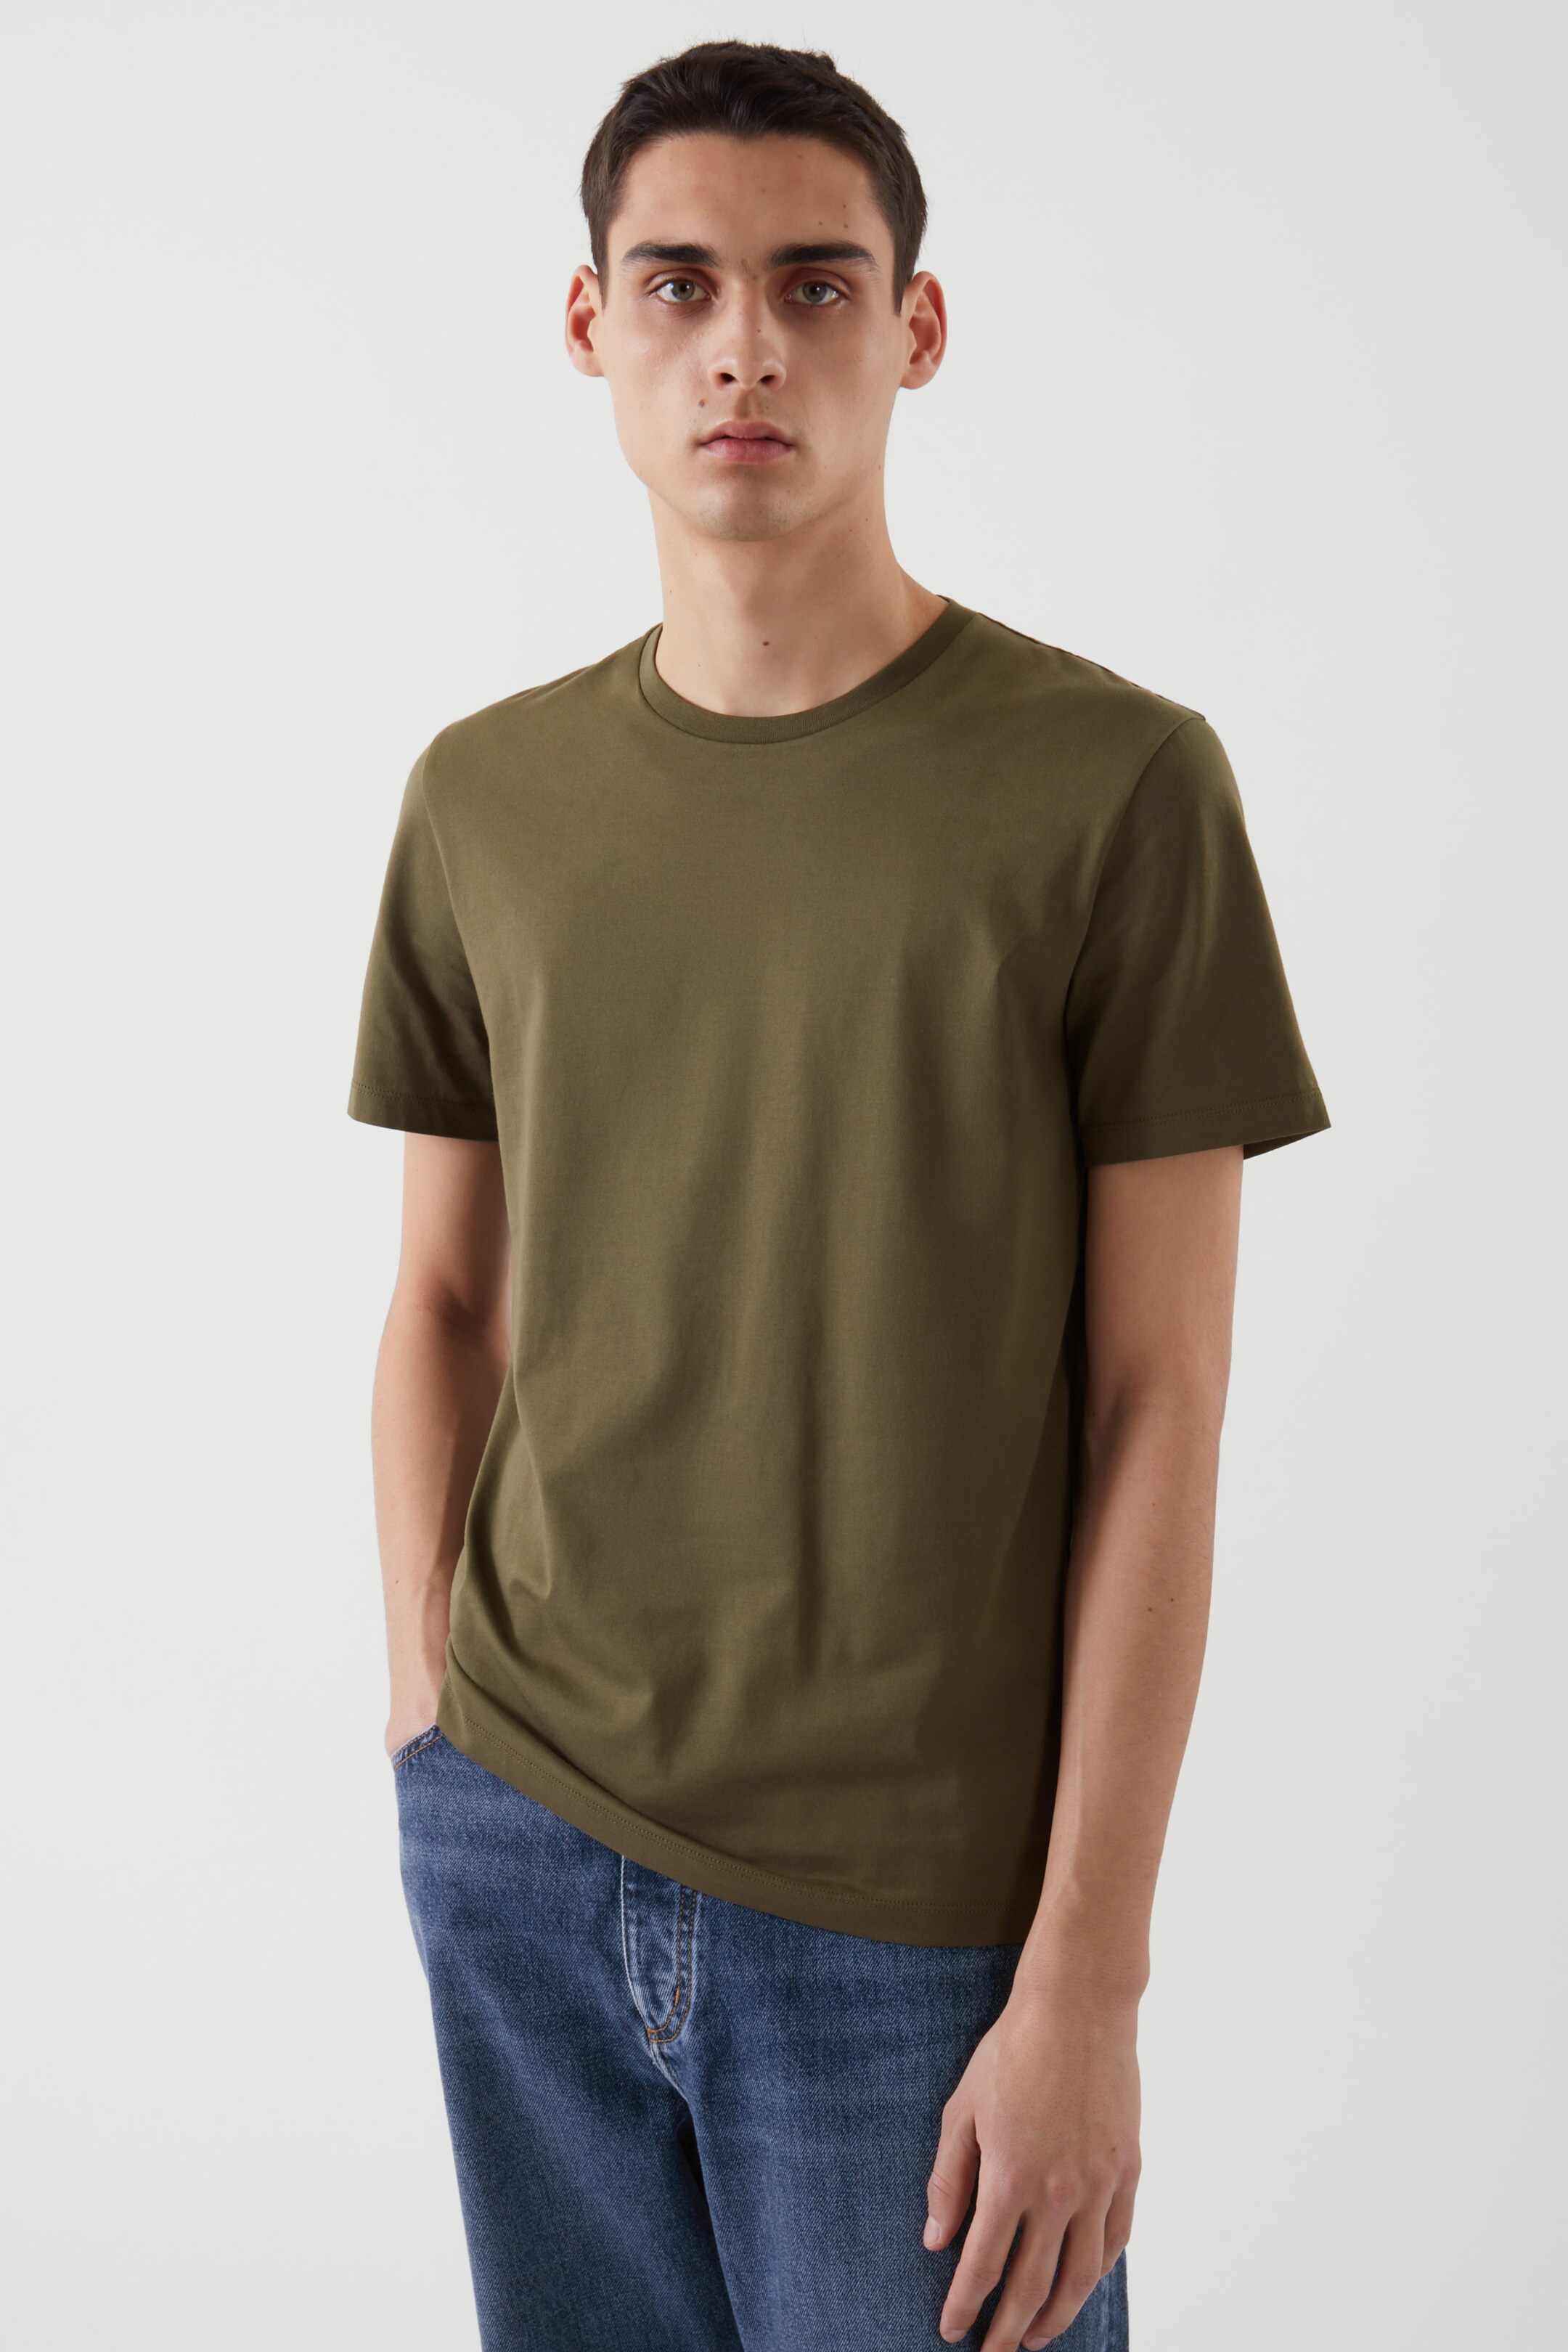 Front image of cos REGULAR-FIT T-SHIRT in KHAKI